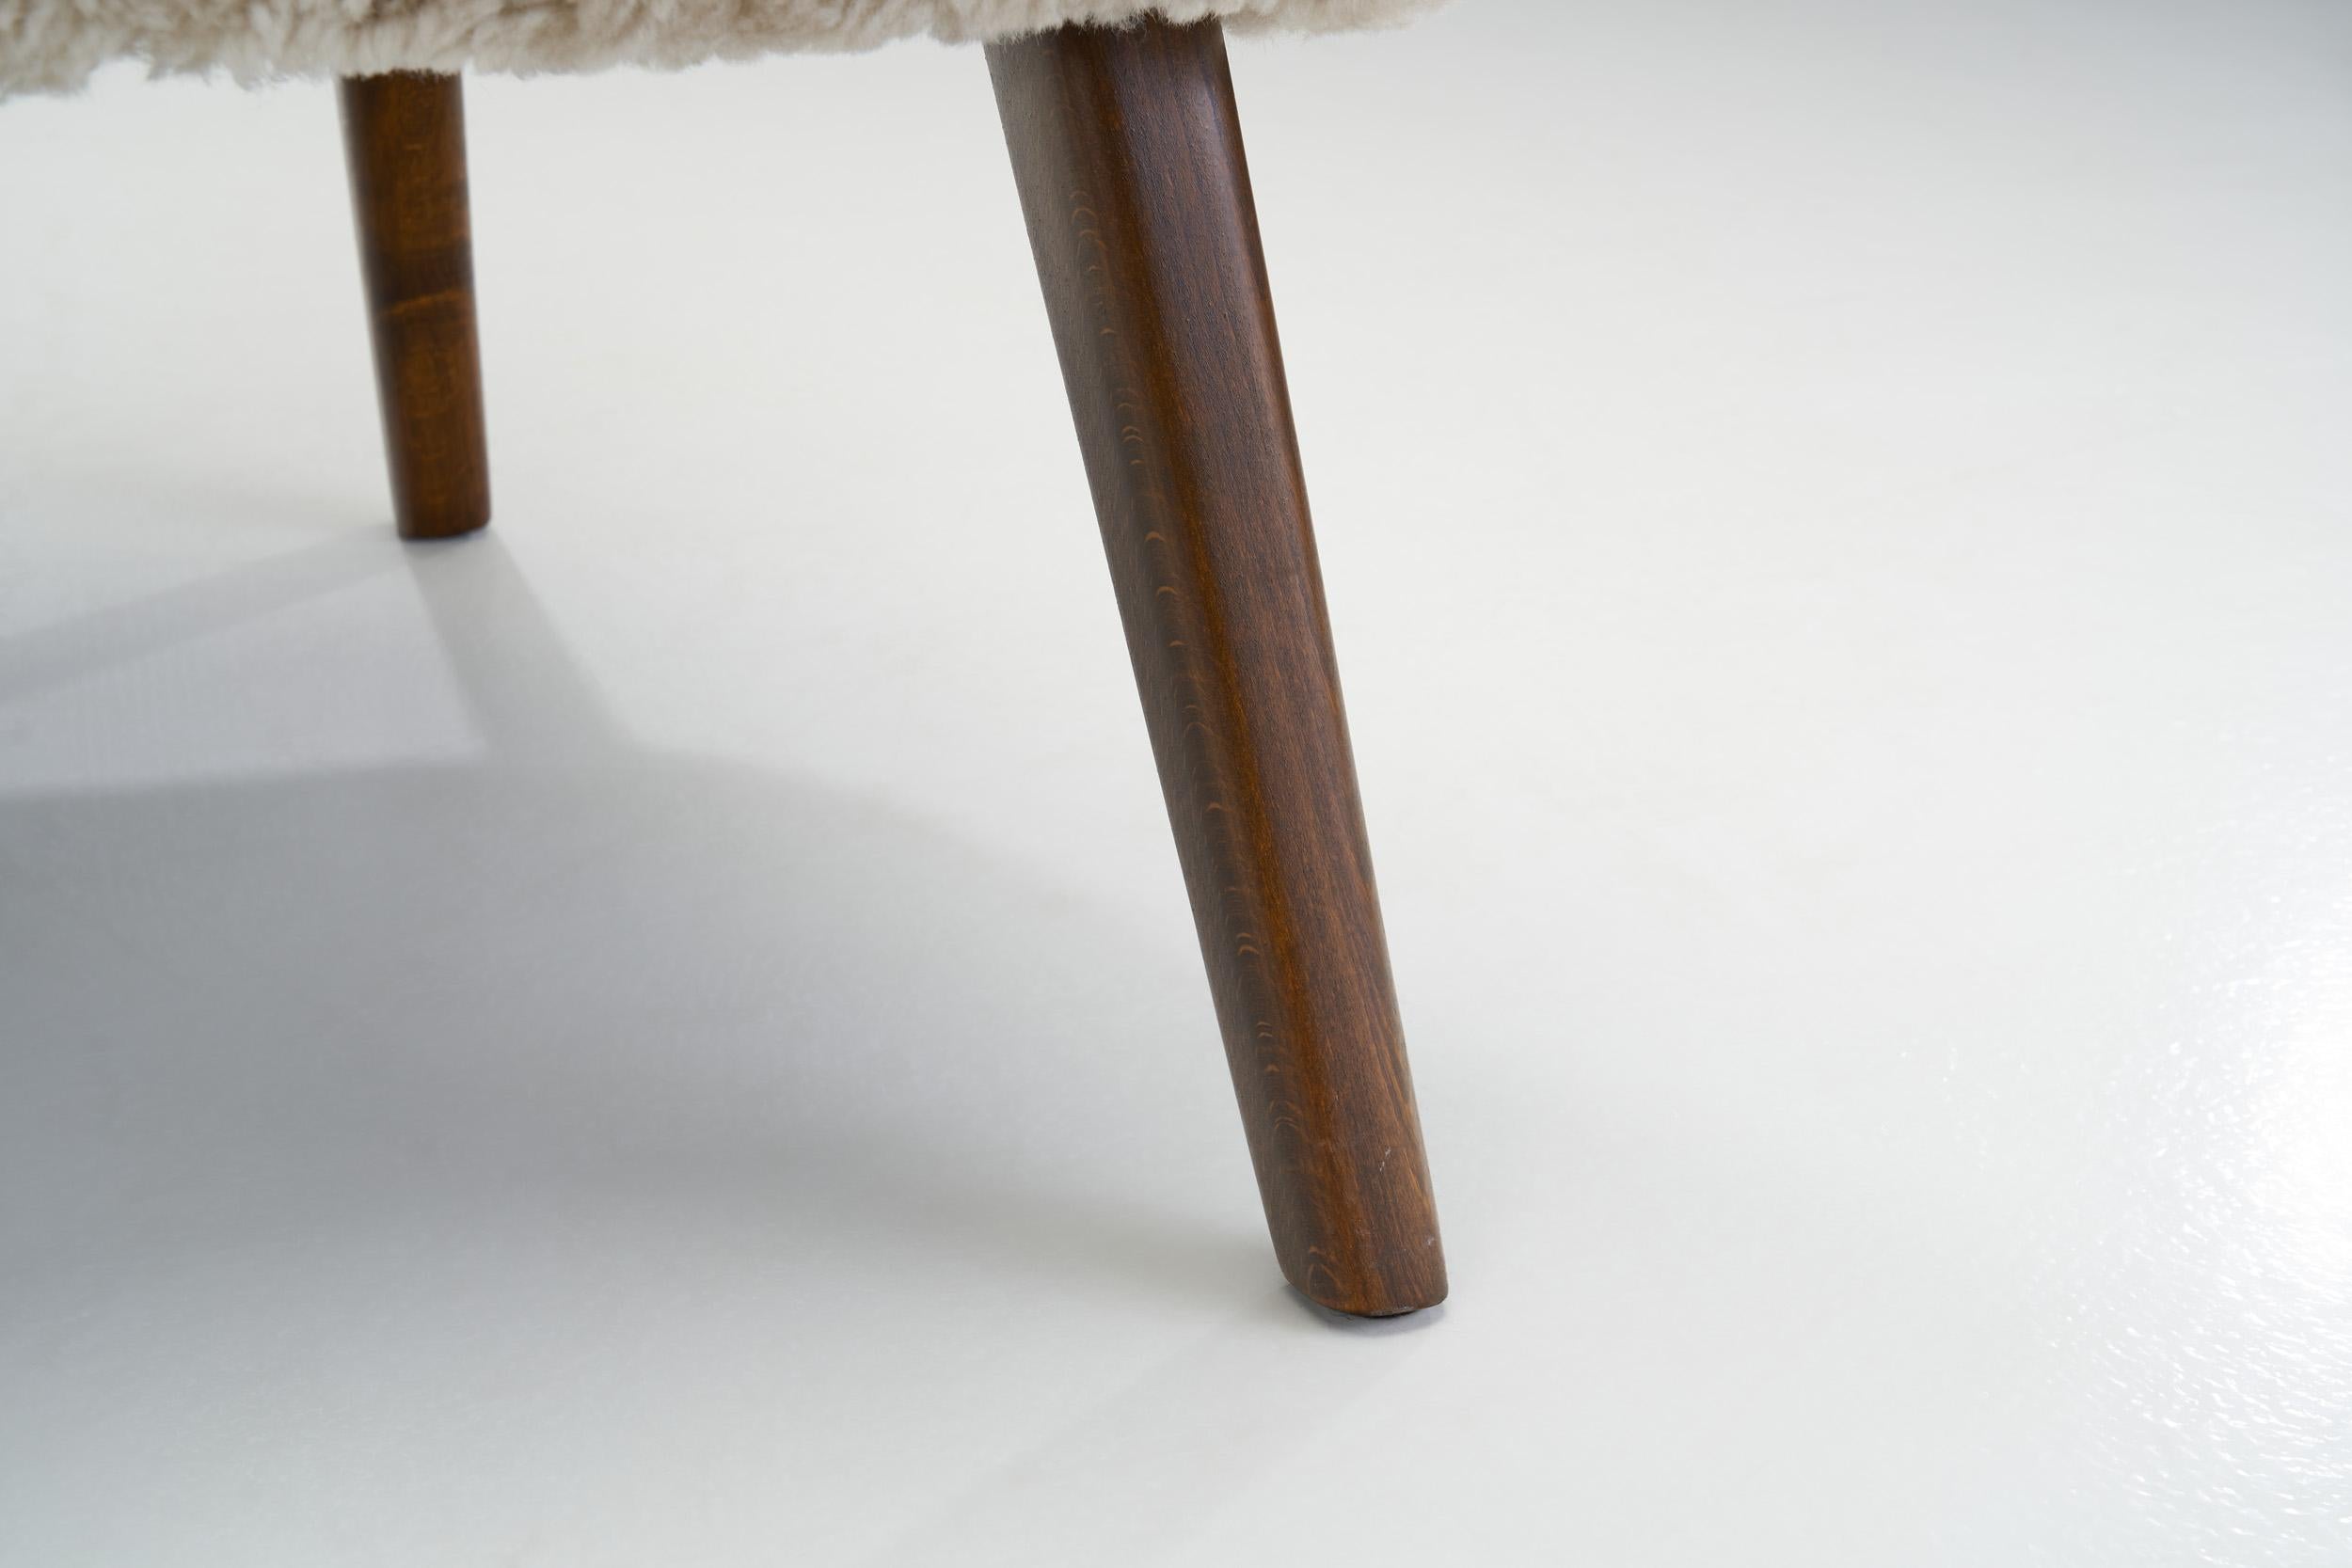 Stained Beech Easy Chairs in Sheepskin by a Danish Cabinetmaker, Denmark 1940s For Sale 12